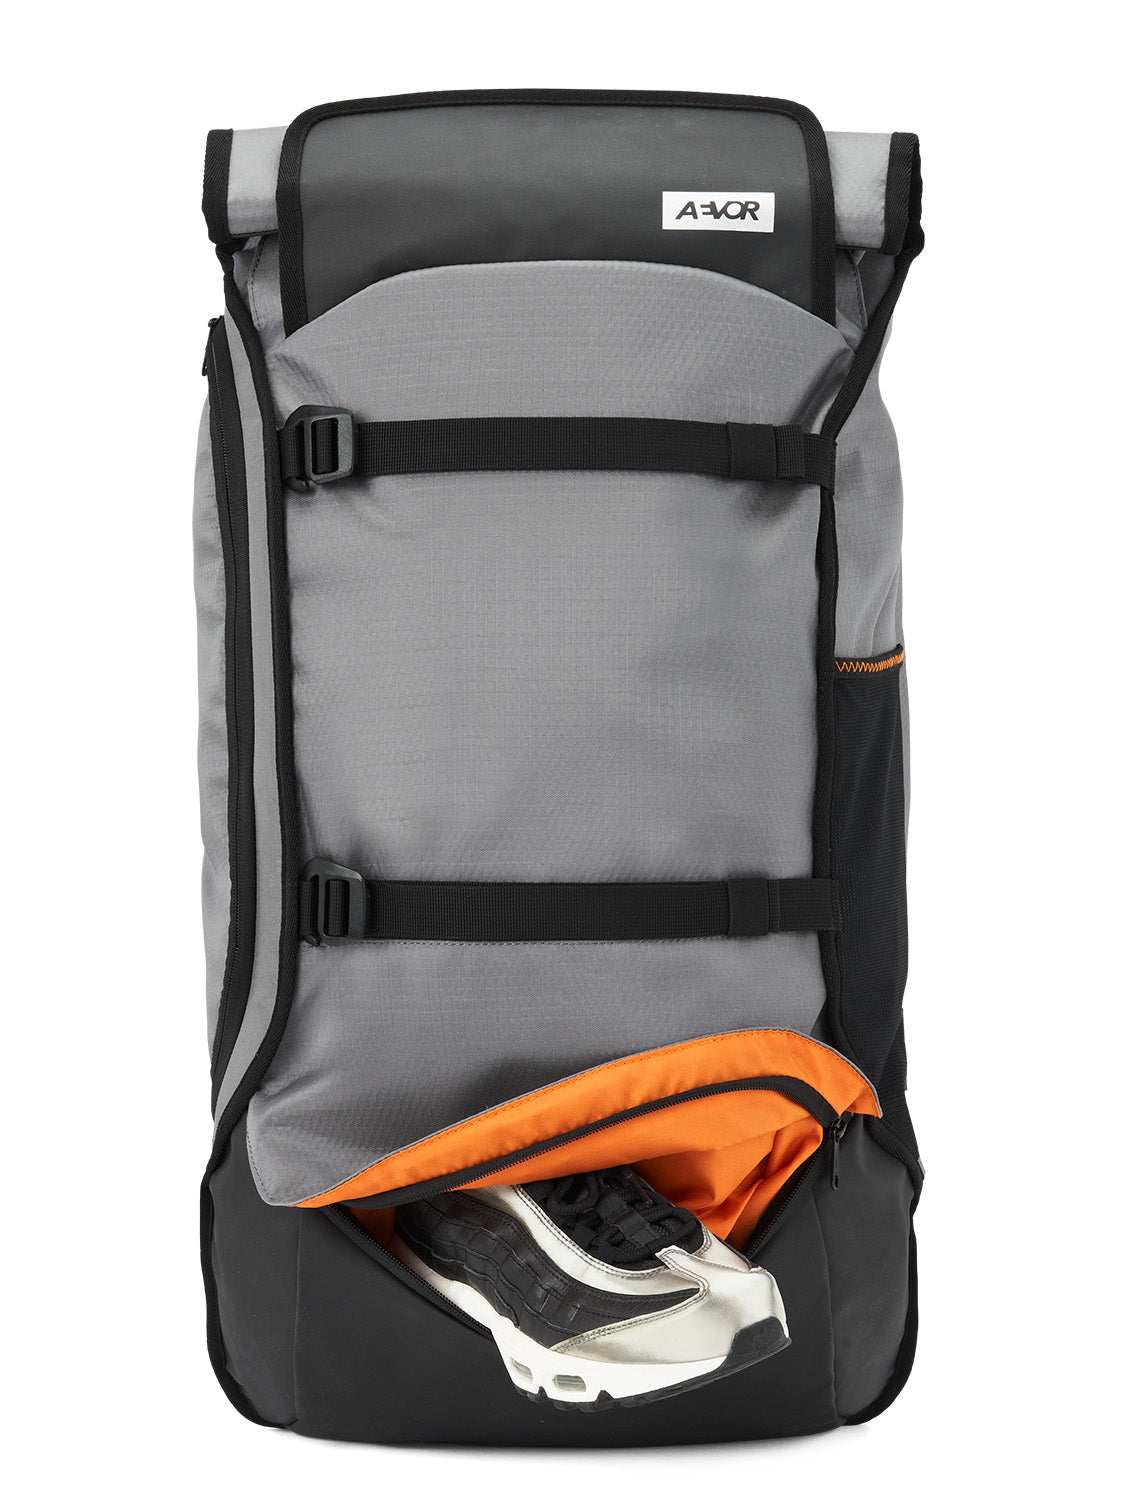 TRAVEL PACK - Modern Urban Design with Hiking Backpack Functions